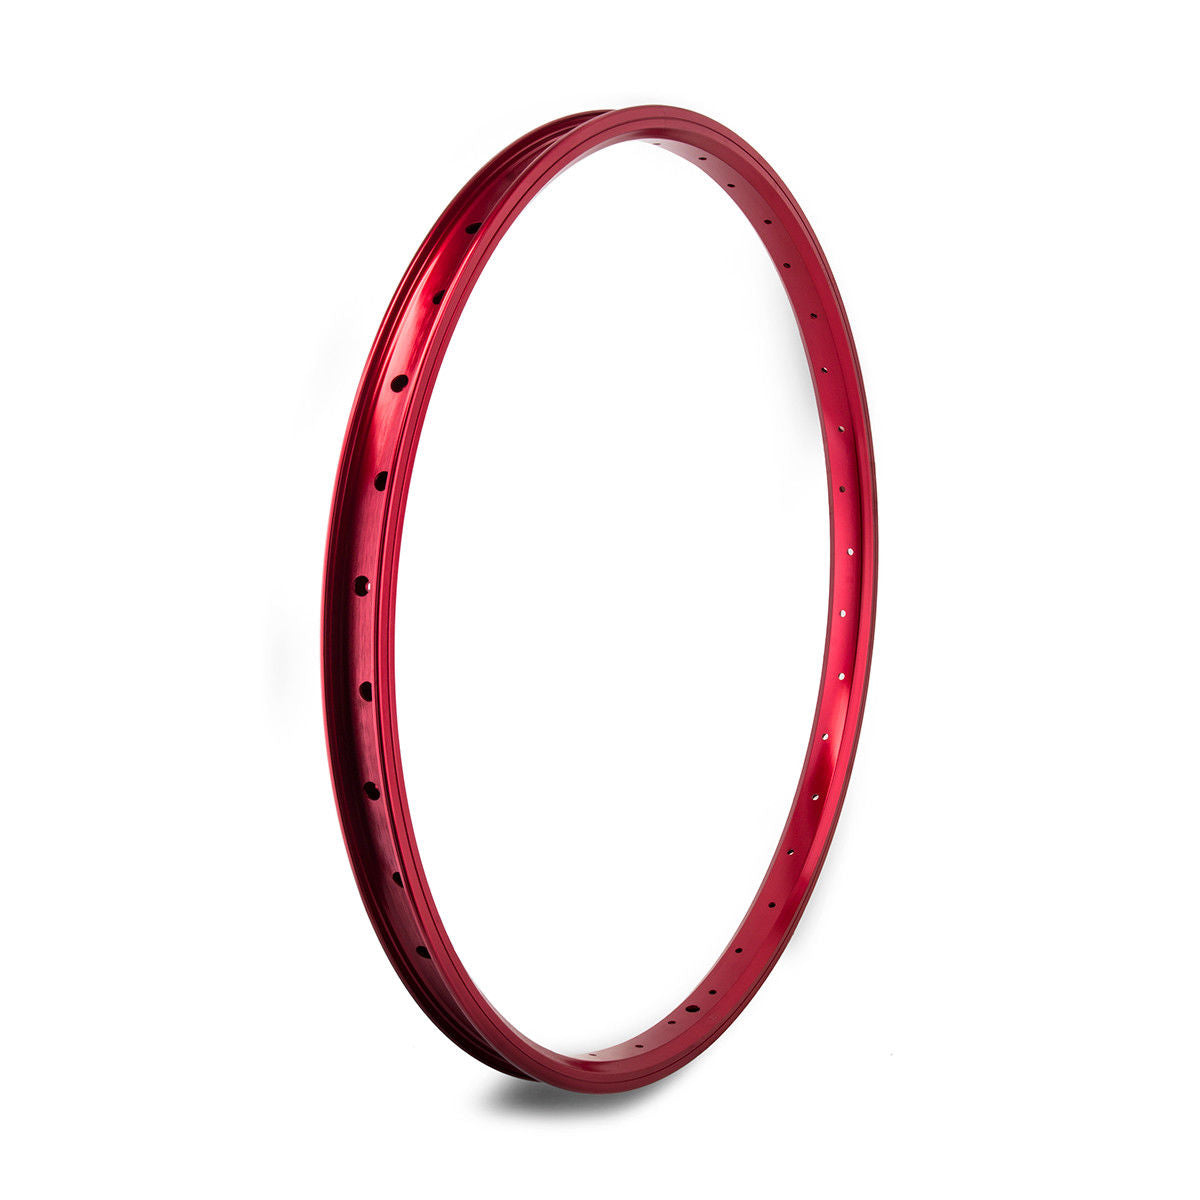 24" SE Racing J24SG Double Wall Rim - 36H - Red Anodized